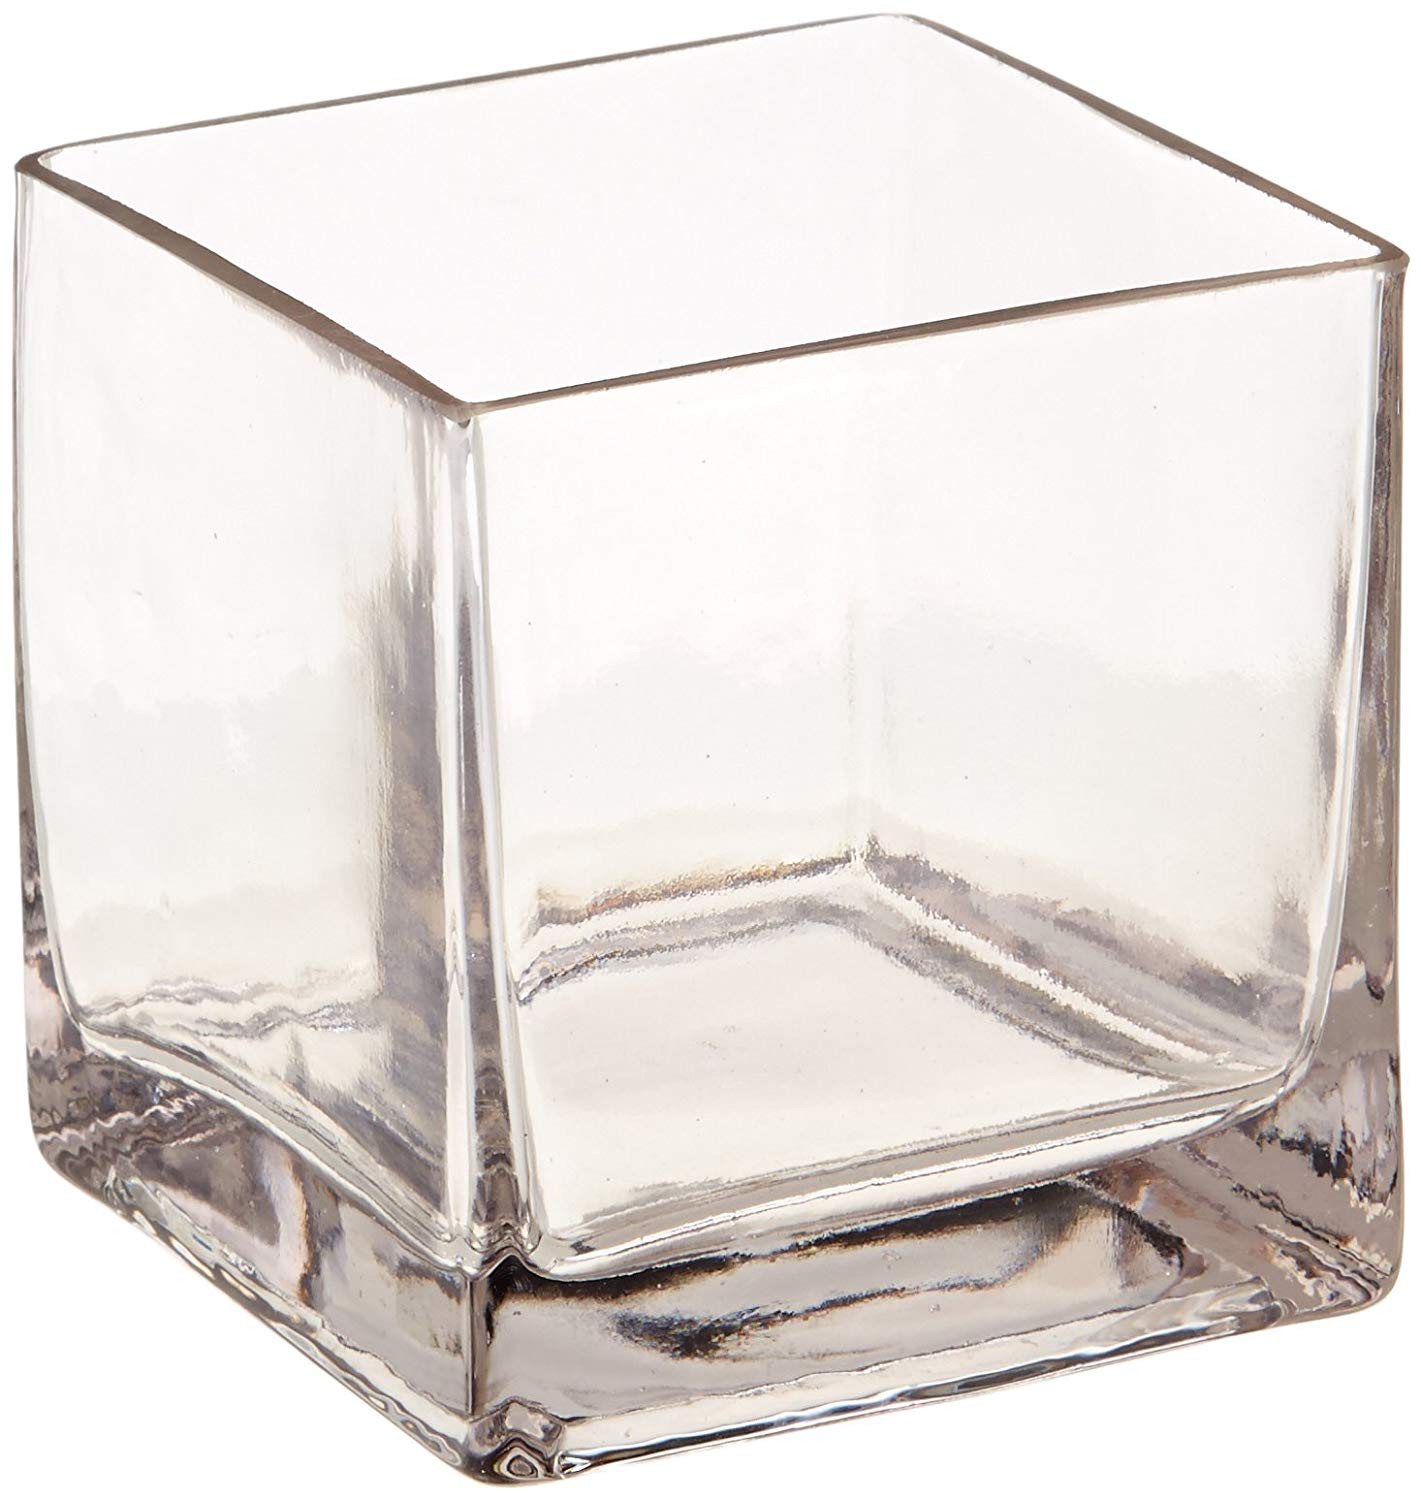 22 Wonderful Small Square Glass Vases Cheap 2024 free download small square glass vases cheap of amazon com 12piece 4 square crystal clear glass vase home kitchen pertaining to 71 jezfmvnl sl1500